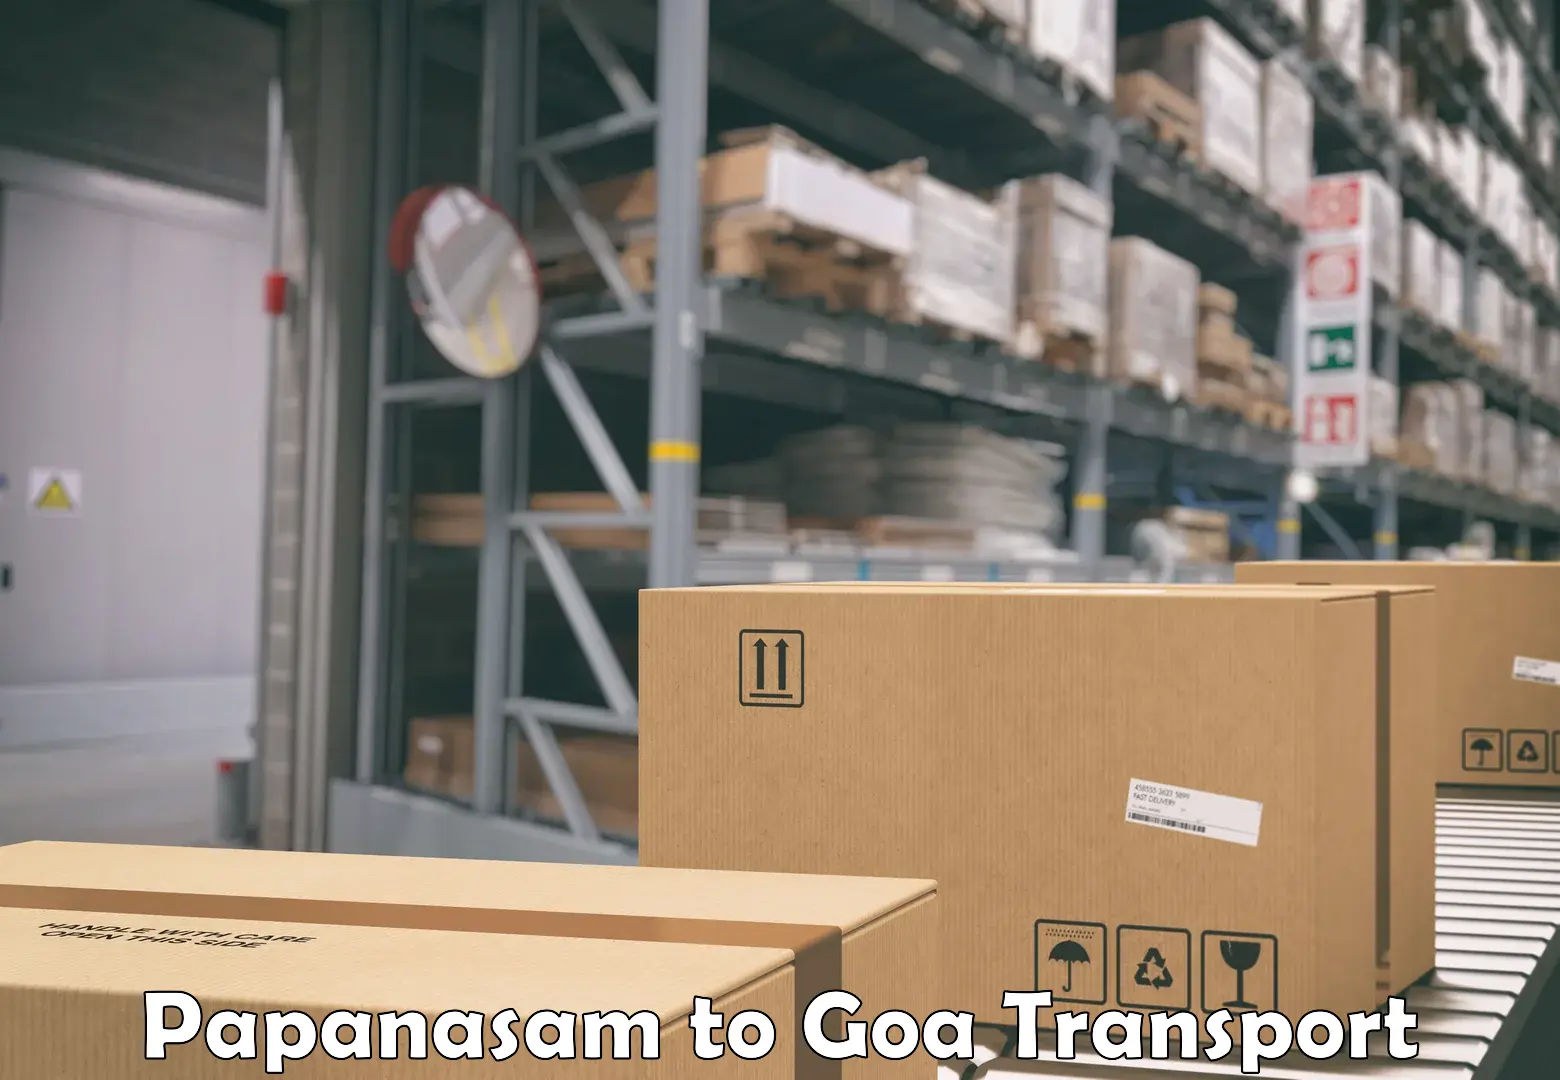 Container transport service Papanasam to Goa